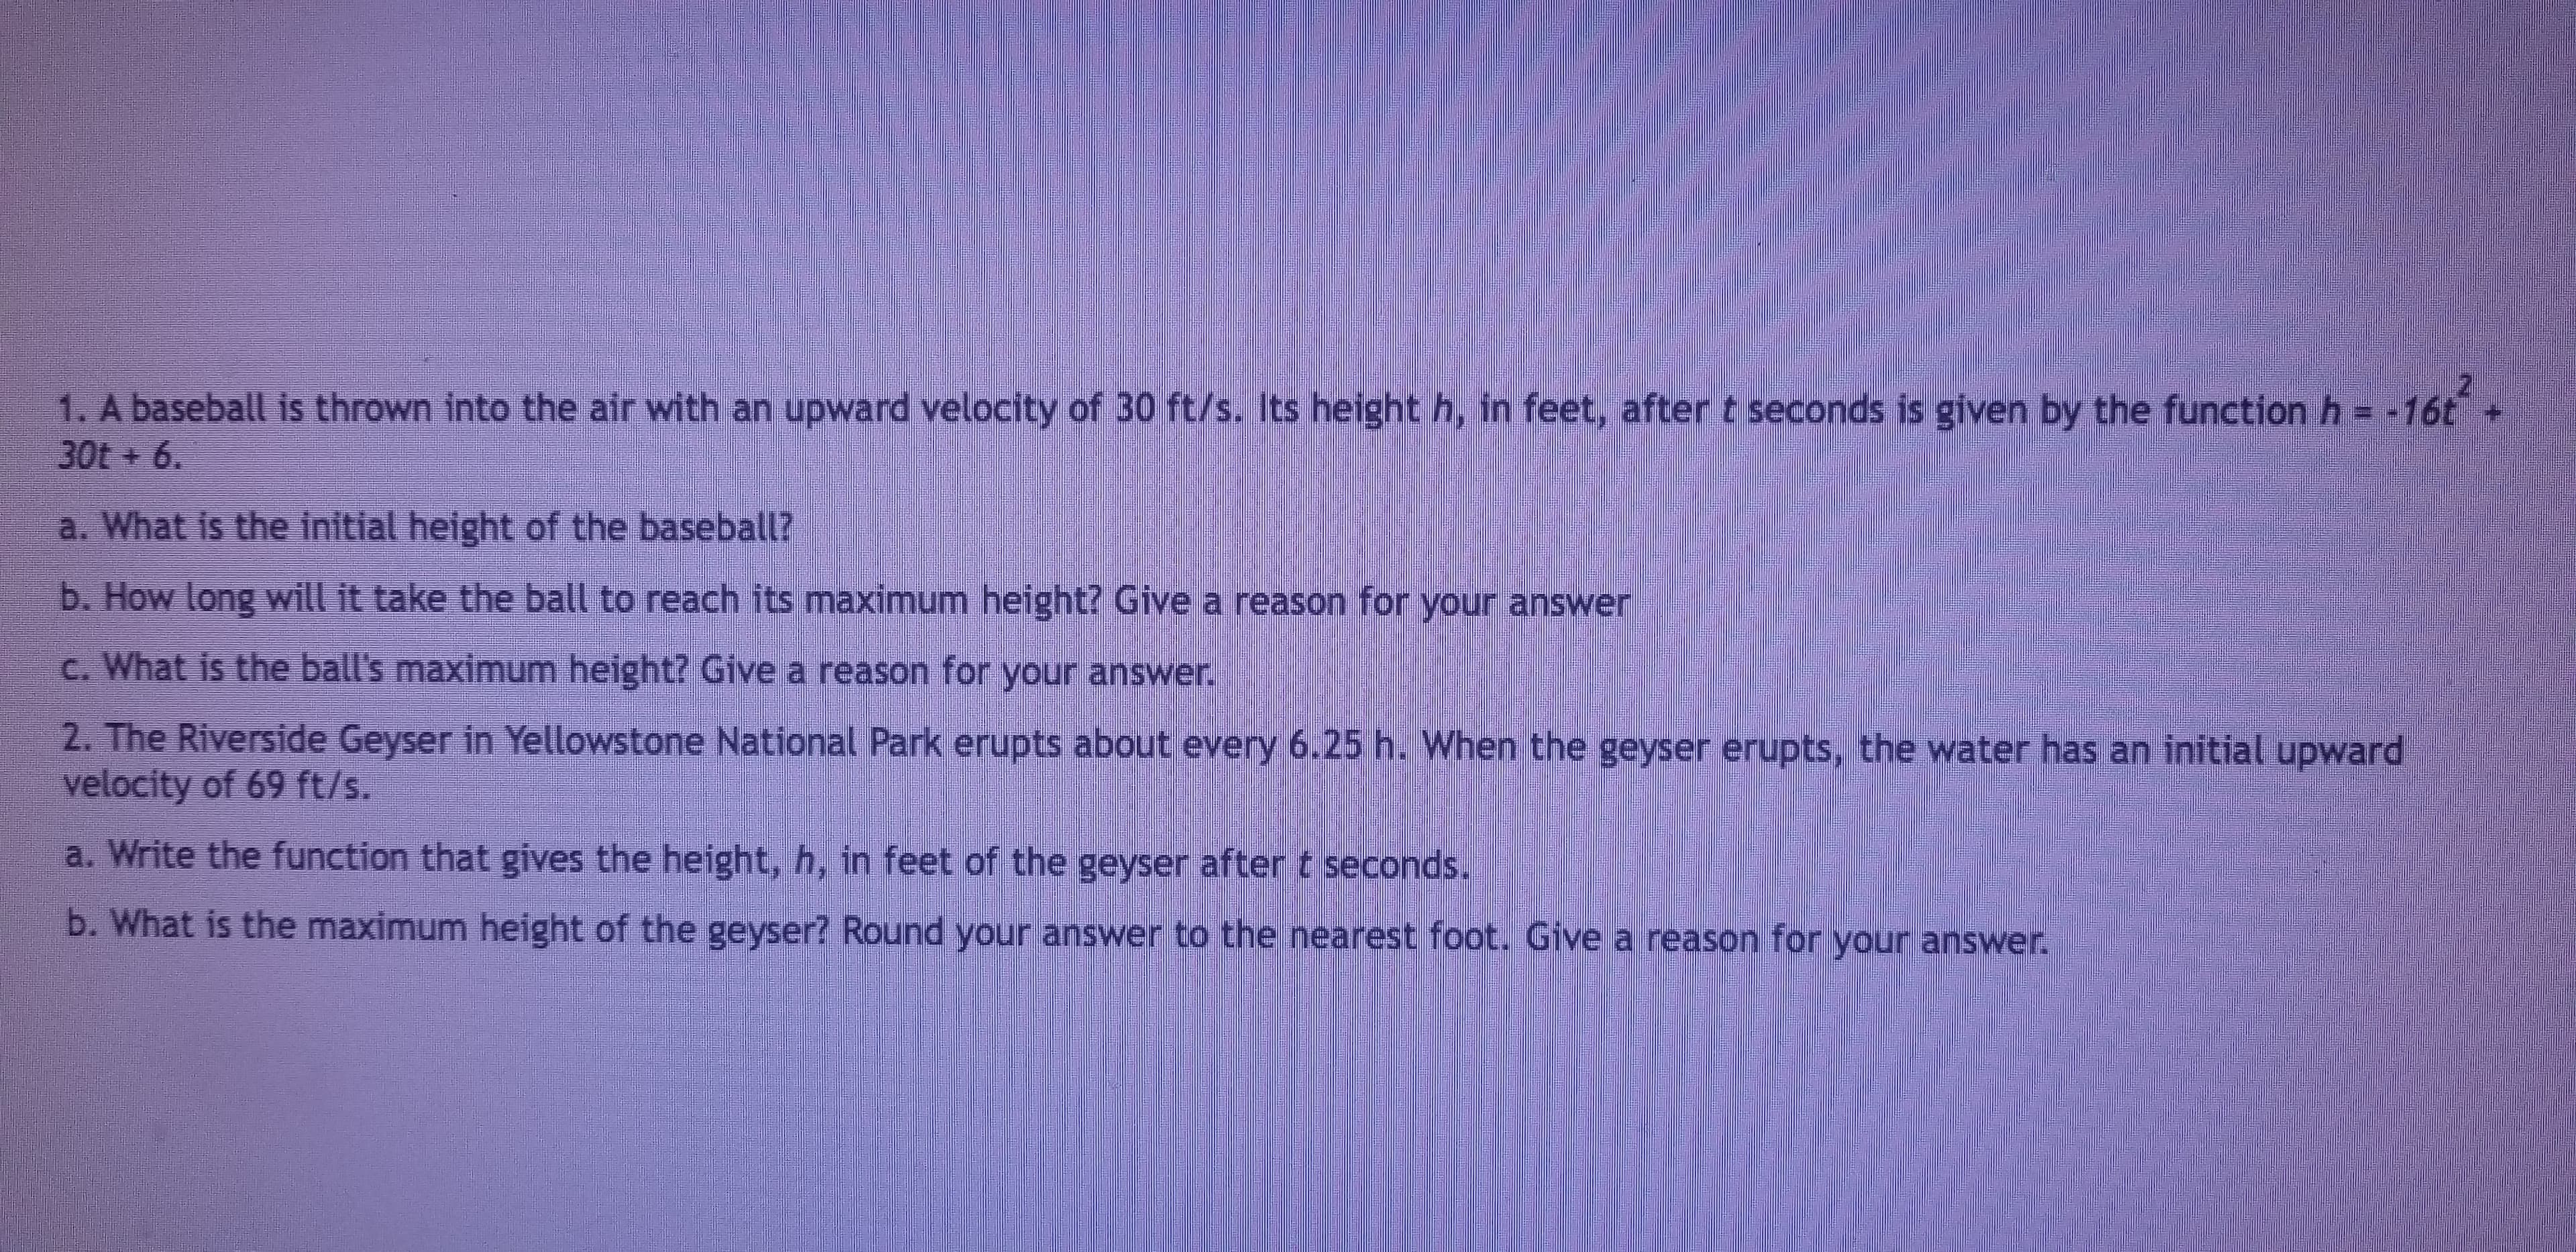 1. A baseball is thrown into the air with an upward velocity of 30 ft/s. Its height h, in feet, after t seconds is given by the function h16t
30t+ 6.
a. What is the initial height of the baseball?
b. How long will it take the ball to reach its maximum height? Give a reason for your answer
c. What is the ball's maximum height? Give a reason for your answer
2. The Riverside Geyser in Yellowstone National Park erupts about every 6.25 h. When the geyser erupts, the water has an initial upward
velocity of 69 ft/s.
a. Write the function that gives the height, h, in feet of the geyser after t seconds.
b. What is the maximum height of the geyser? Round your answer to the nearest foot. Give a reason for your answer.
